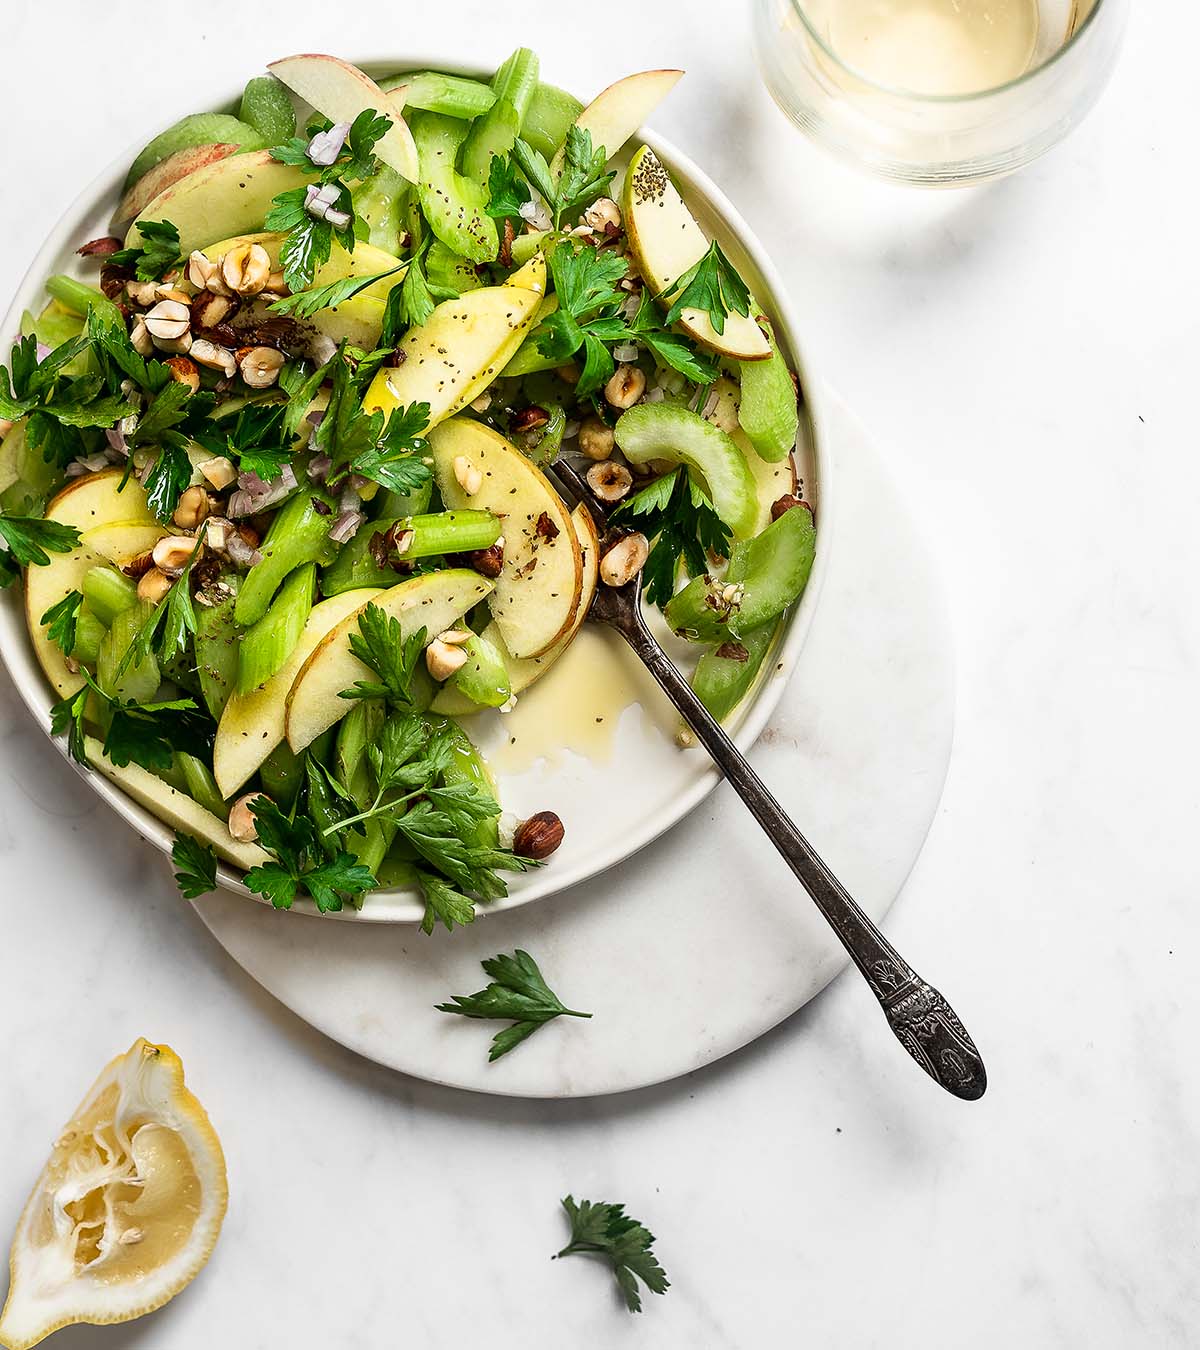 Celery salad with apples, shallots, parsley and walnuts on a flat plate